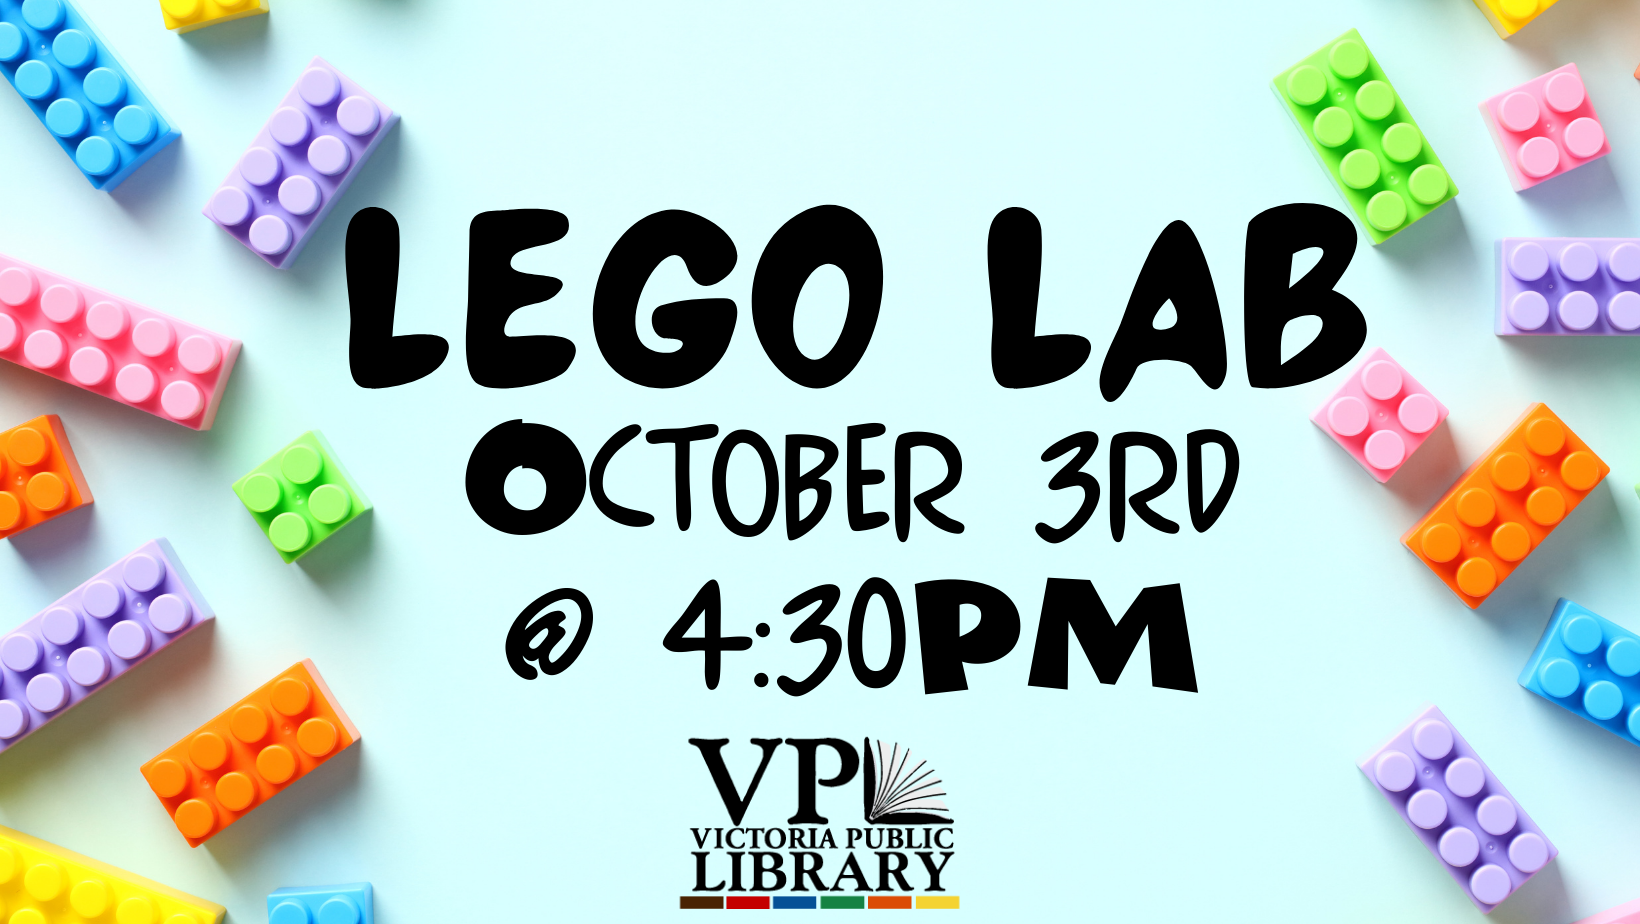 Our favorite program for all of you Lego fans! Join us for an evening of Lego building. We will have both small Legos and big blocks available so all ages are able to participate.